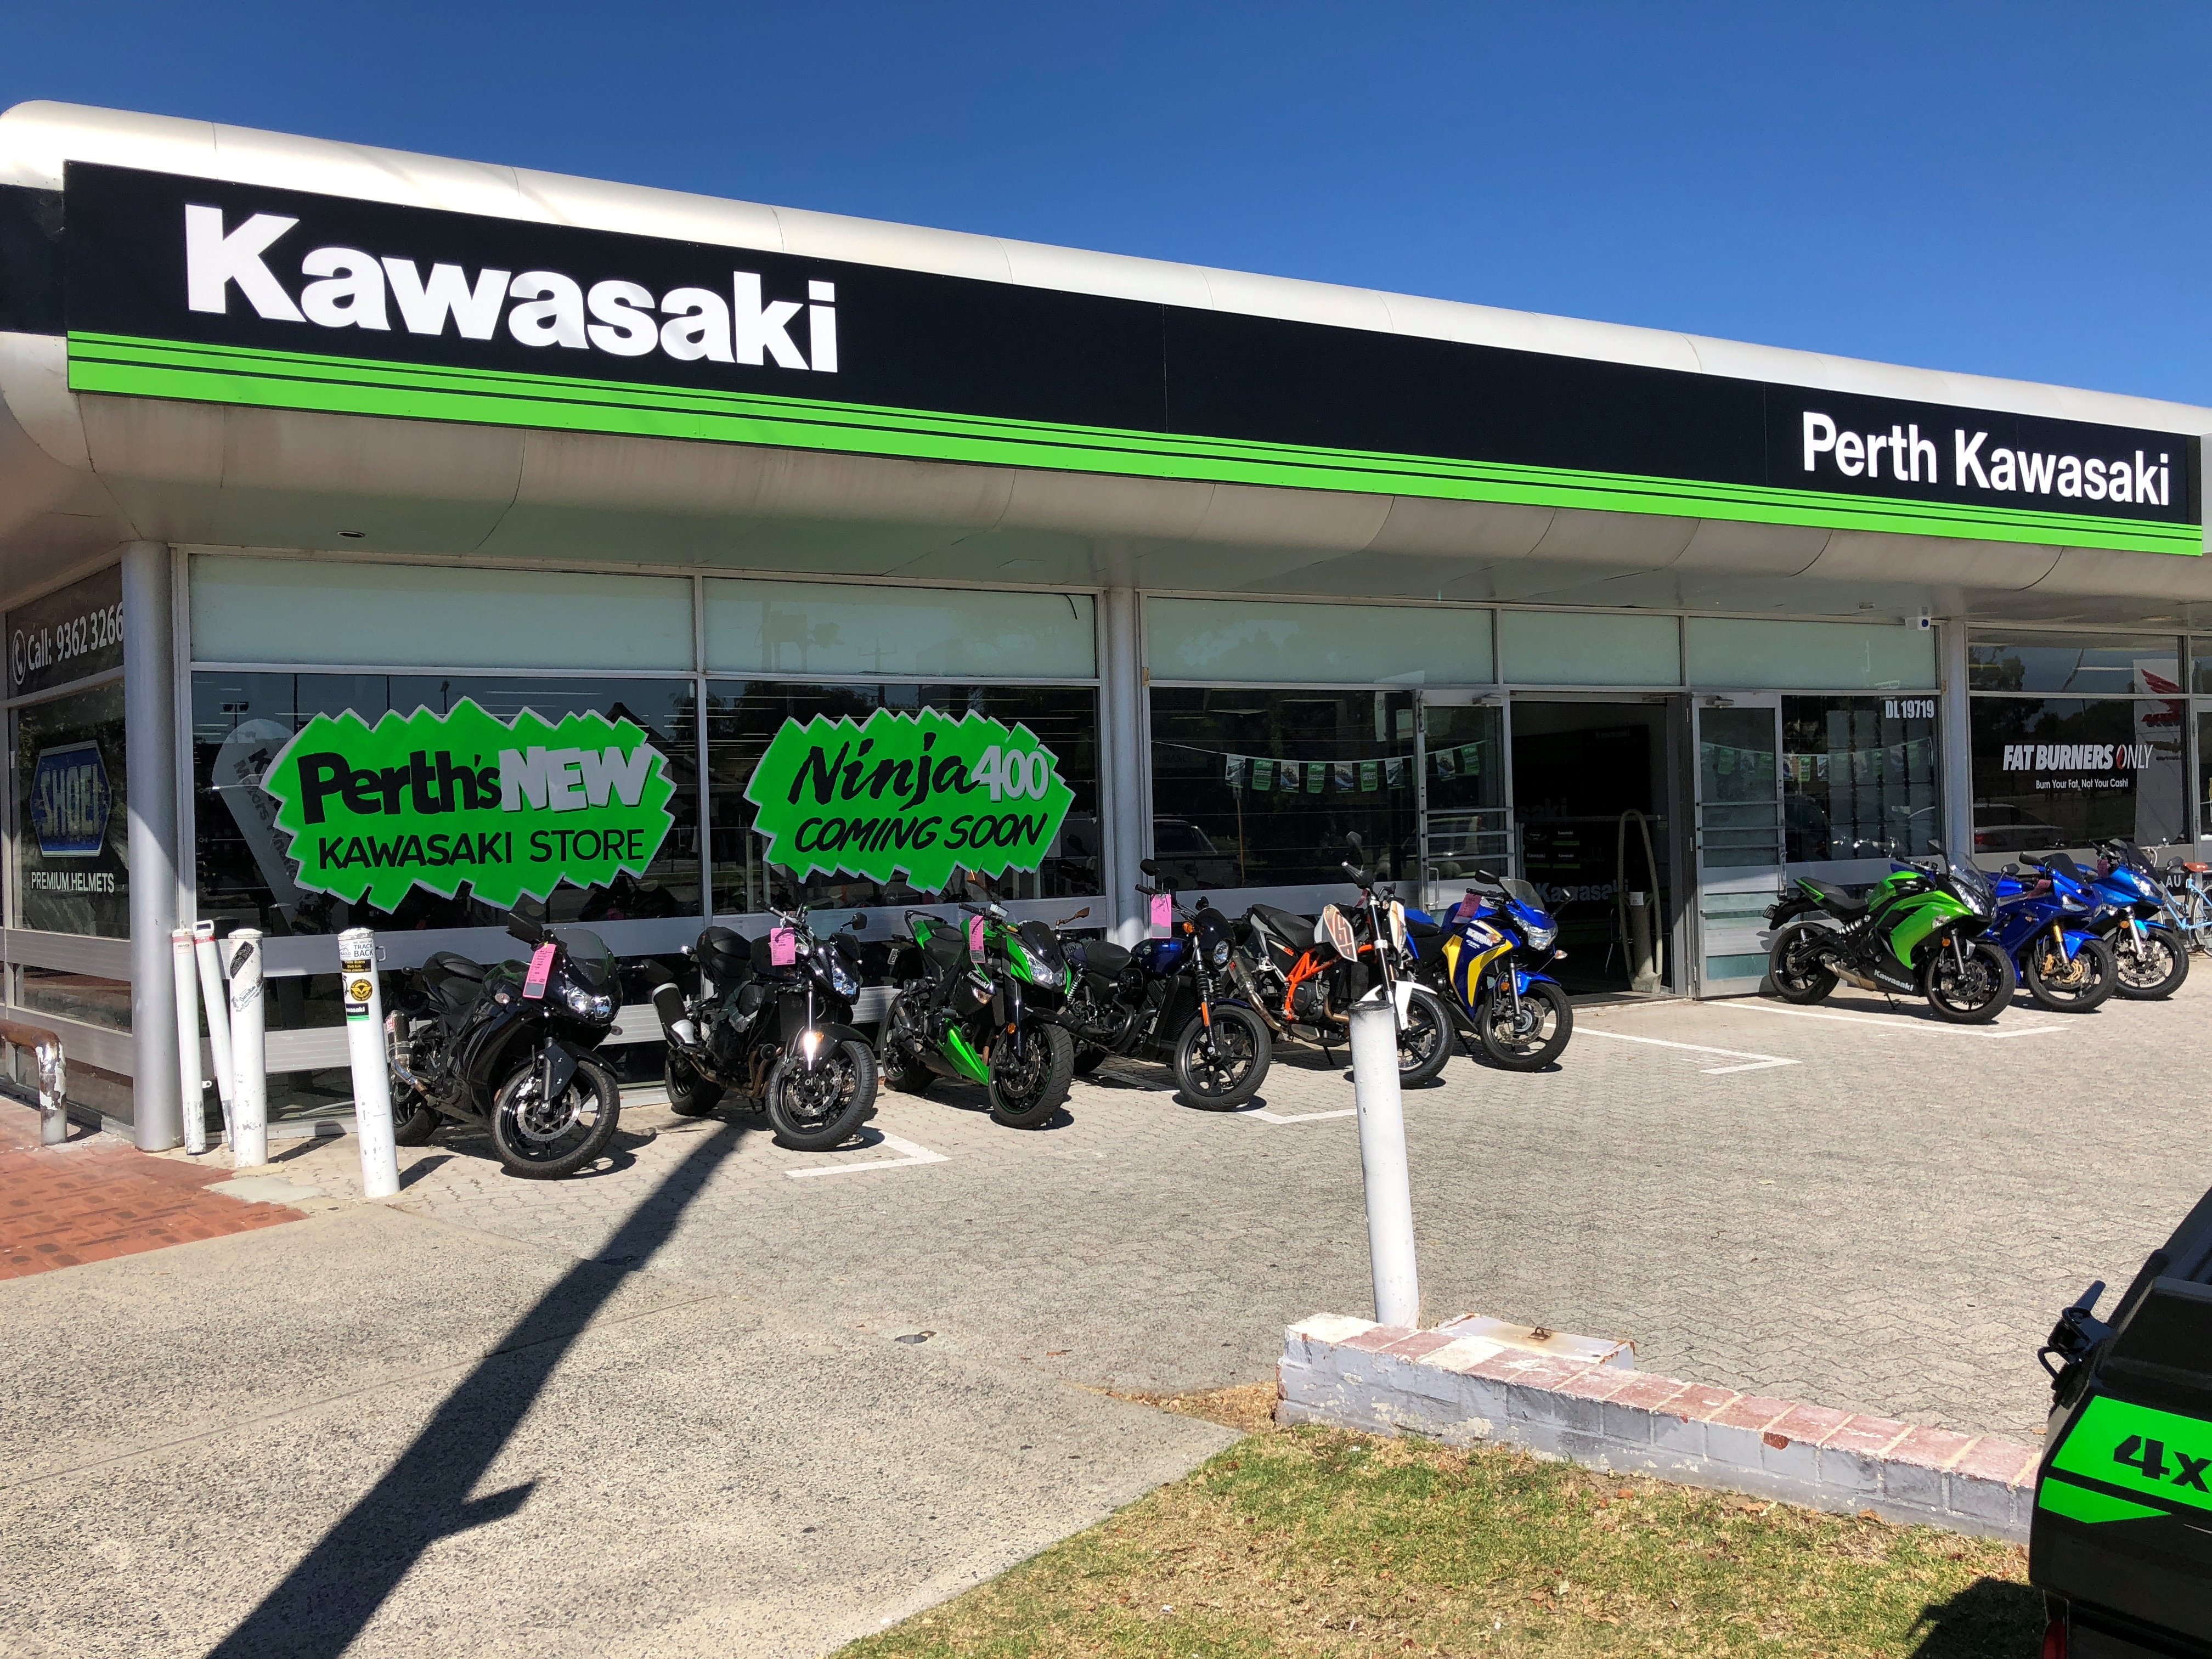 guiden strejke personificering Perth Kawasaki on Twitter: "We have now taken over from Causeway Kawasaki.  Come down and see us :) #kawasakiaustralia #ninja #victoriapark  #motorcycles https://t.co/dmMj2PbwUA" / Twitter